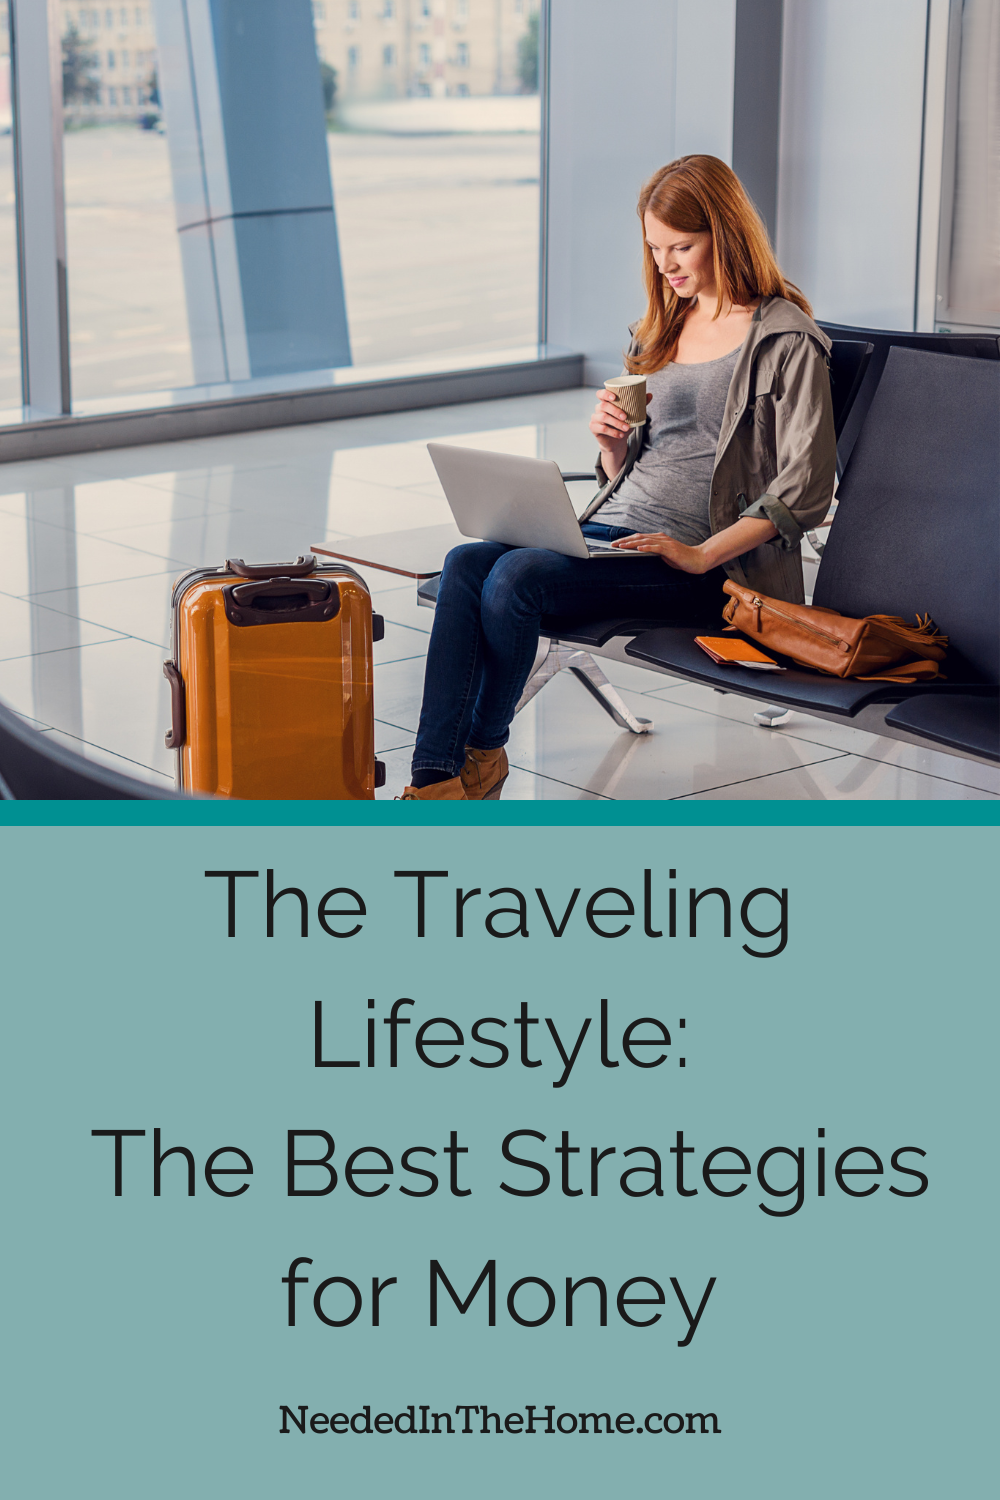 pinterest pin description the traveling lifestyle the best strategies for money woman in airport typing on laptop next to luggage holding coffee neededinthehome